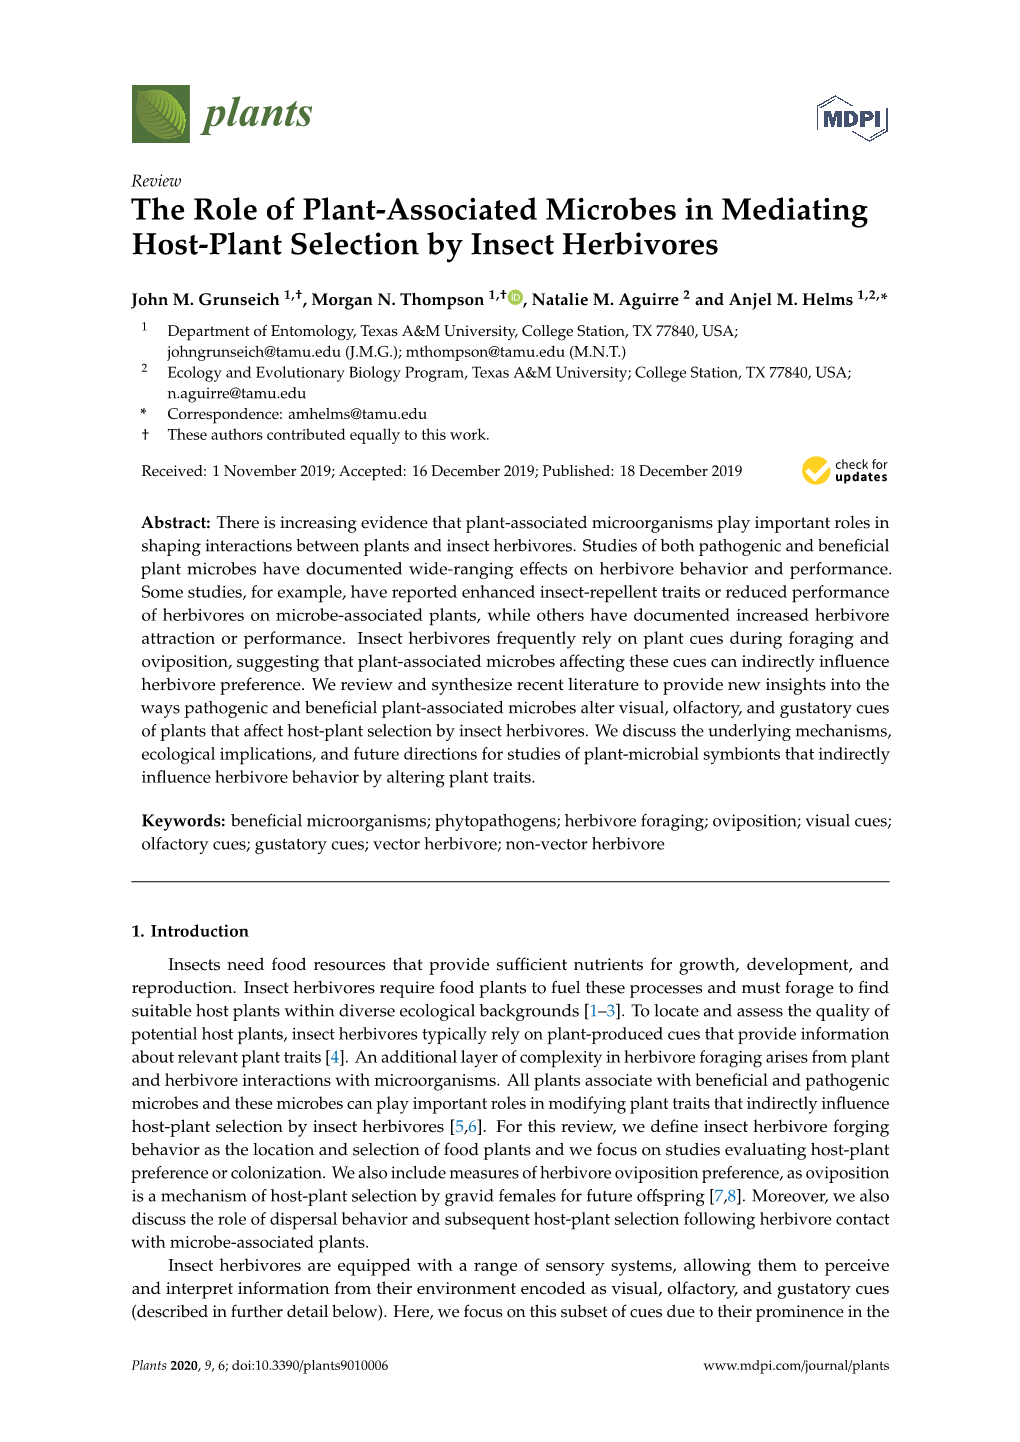 The Role of Plant-Associated Microbes in Mediating Host-Plant Selection by Insect Herbivores